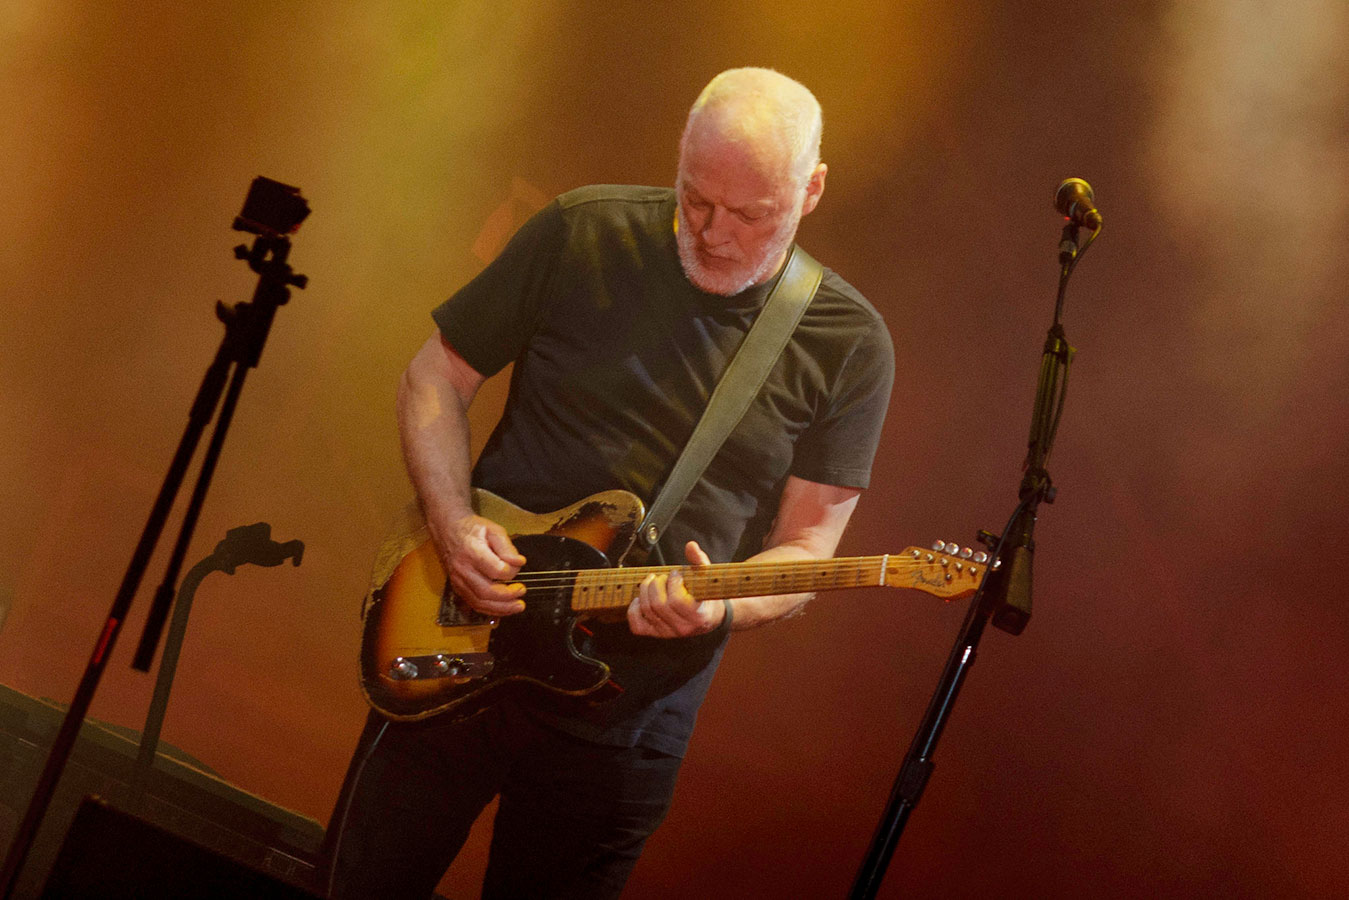 The Greatest Guitarists Series: David Gilmour